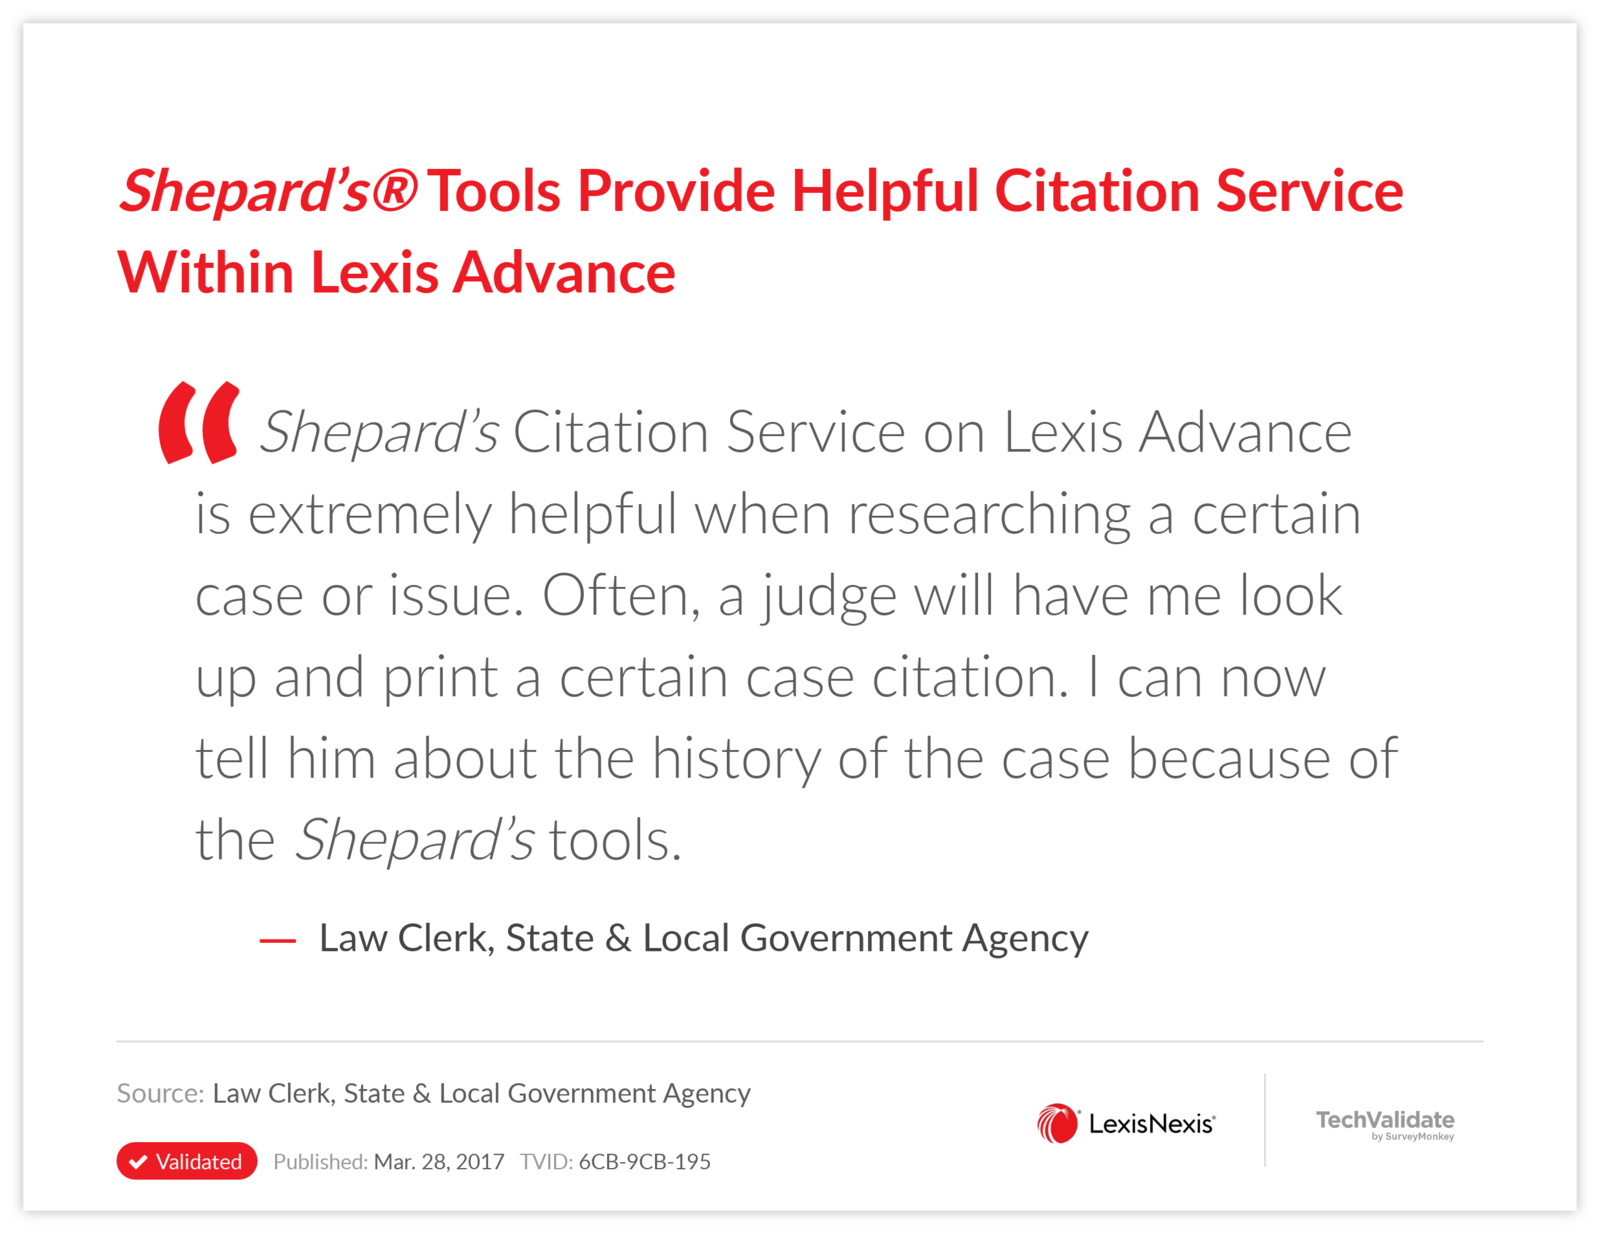 Shepard's(R) Tools Provide Helpful Citation Service Within Lexis Advance